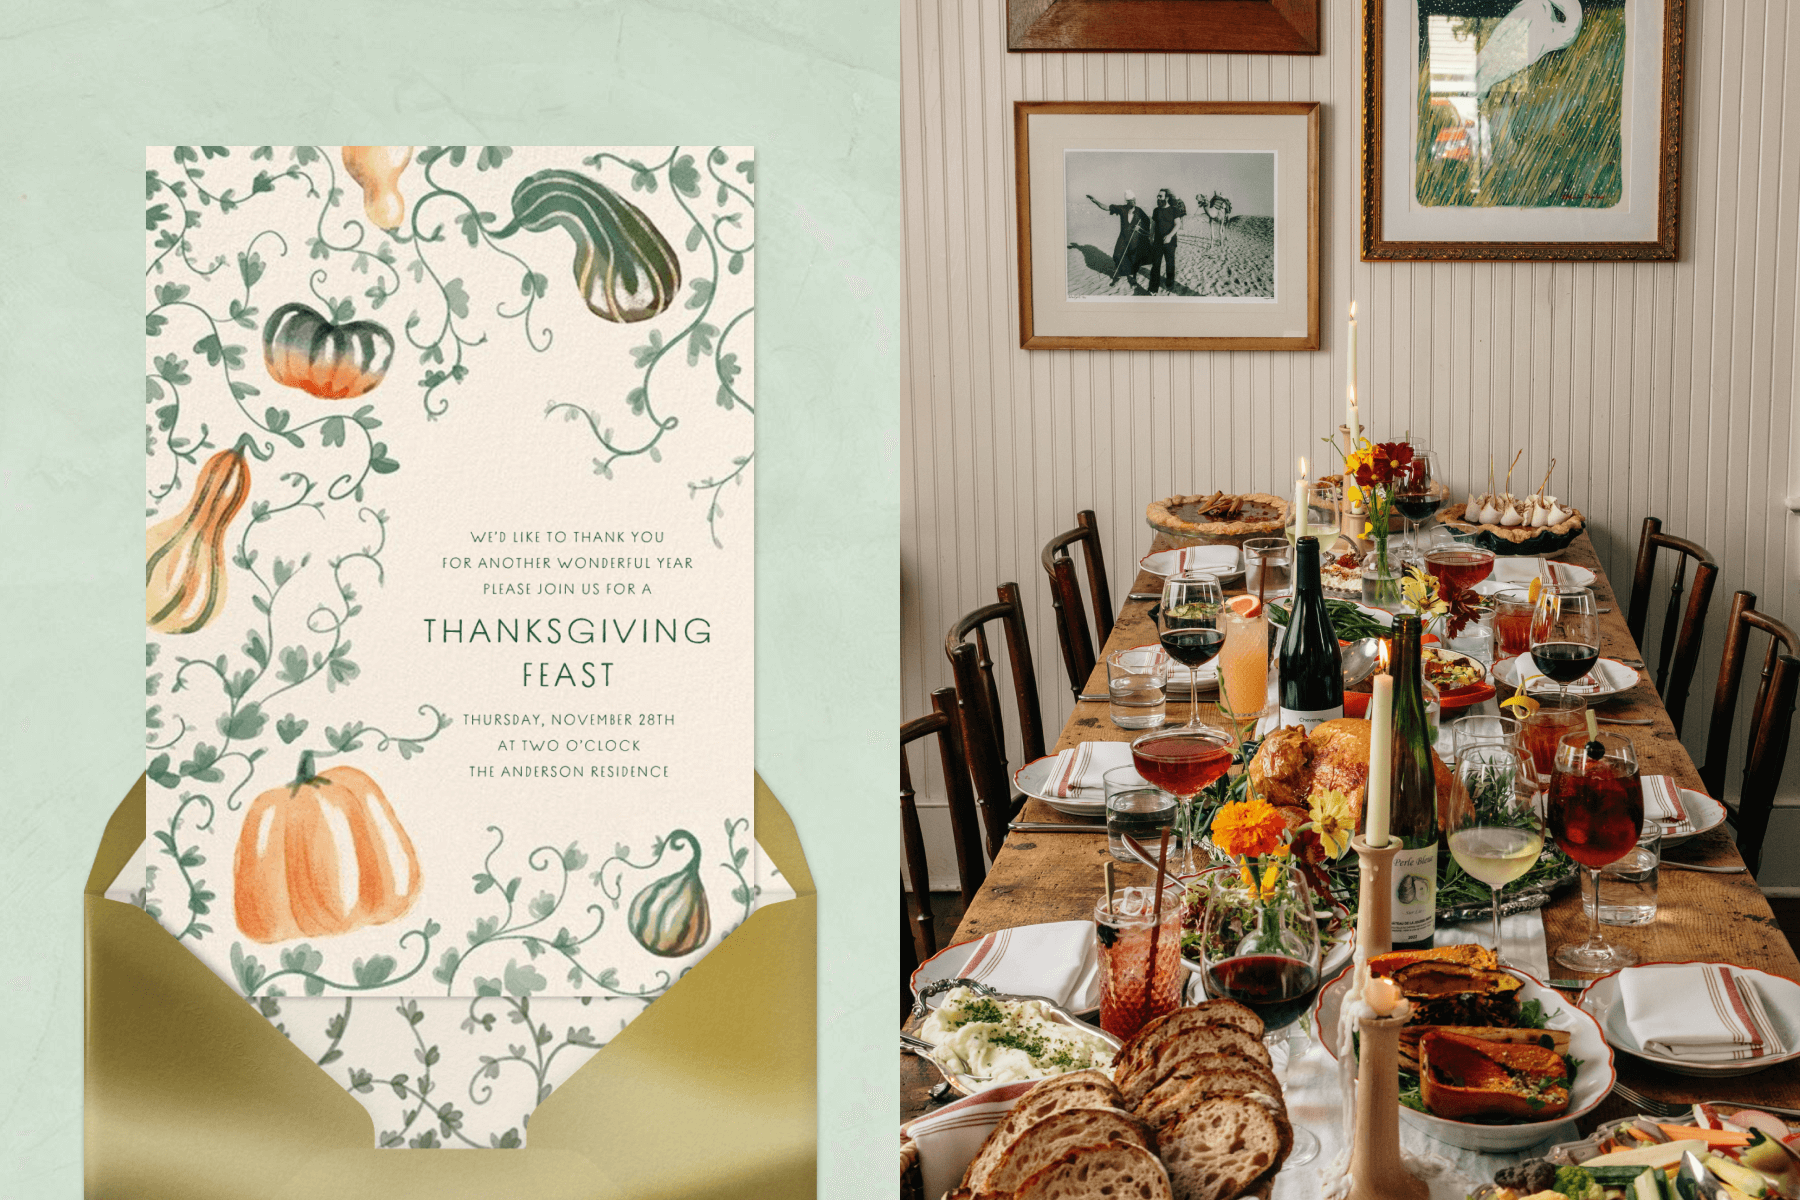 Left: Invitation card for a Thanksgiving Feast that is decorated with orange pumpkins and green gourds. Right: Thanksgiving table set with food, drinks, taper candles, and flowers. 